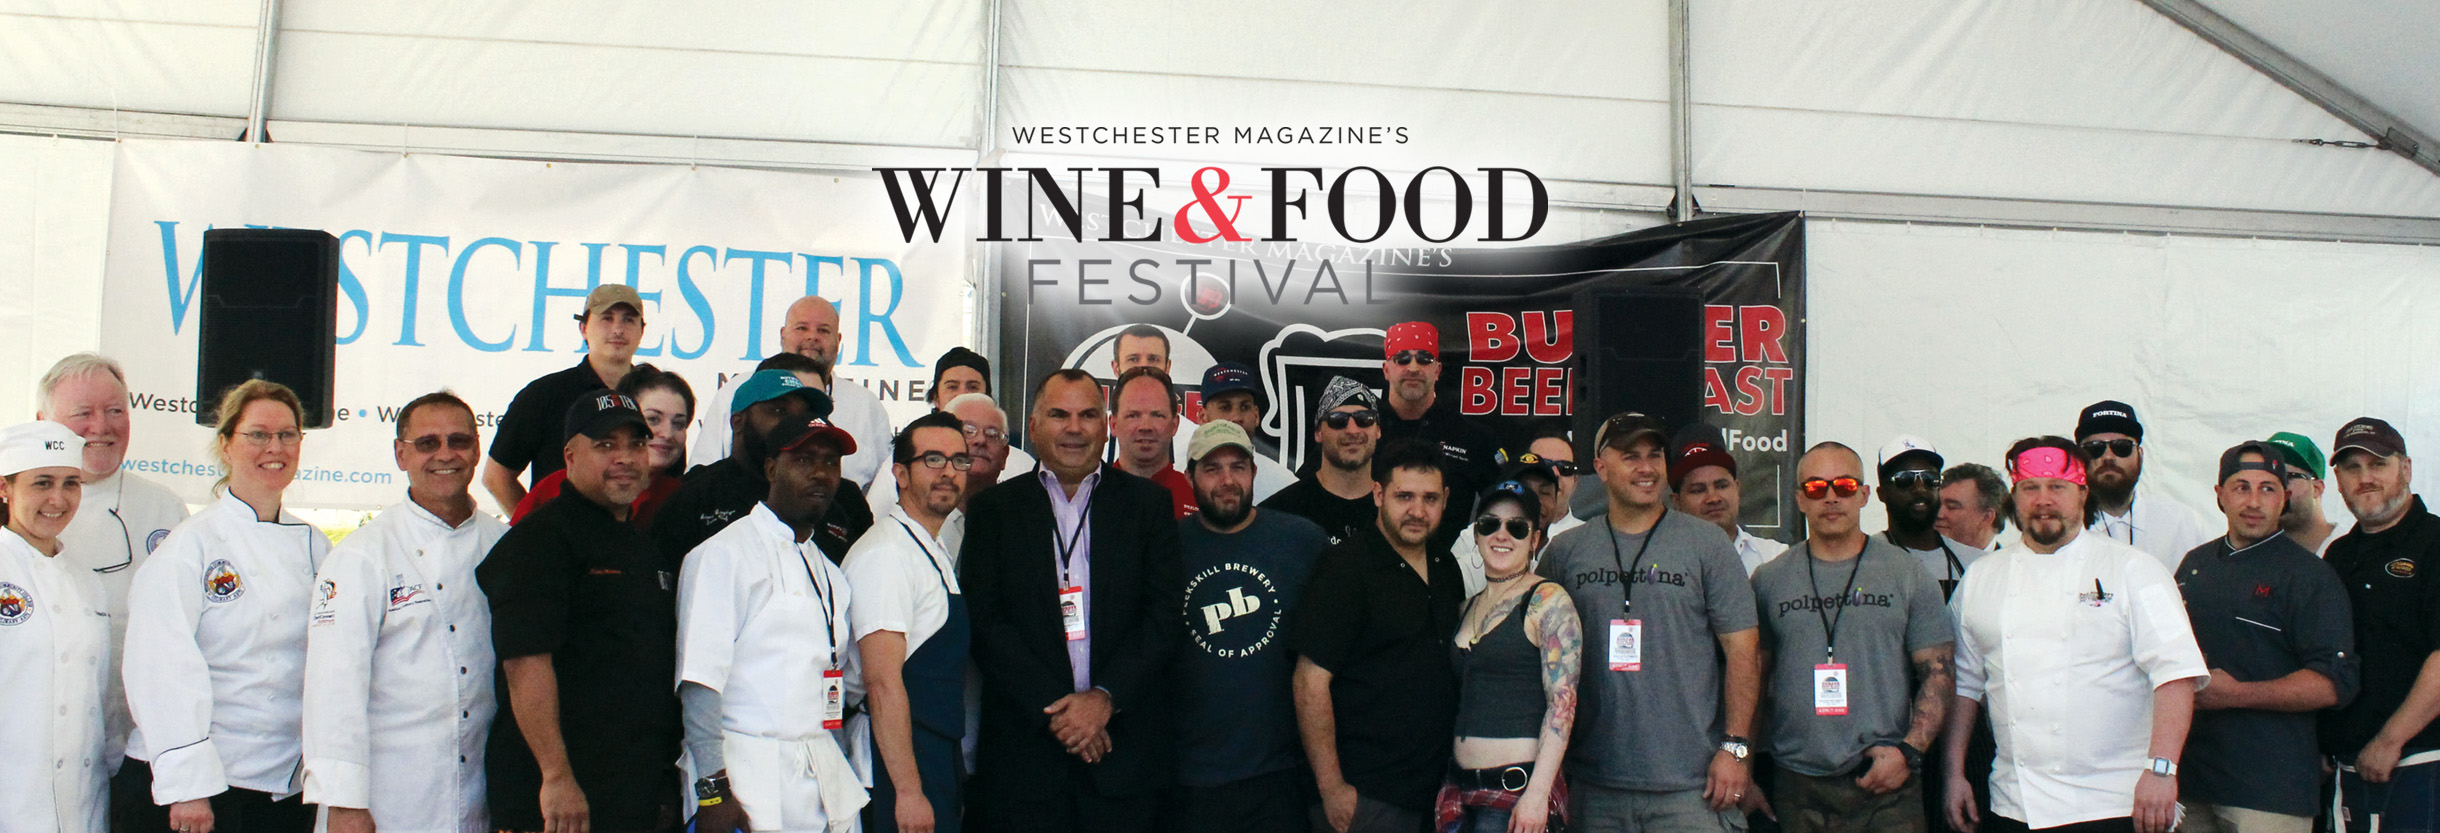 Wine & Food Festival Westchester Wine and Food Festival